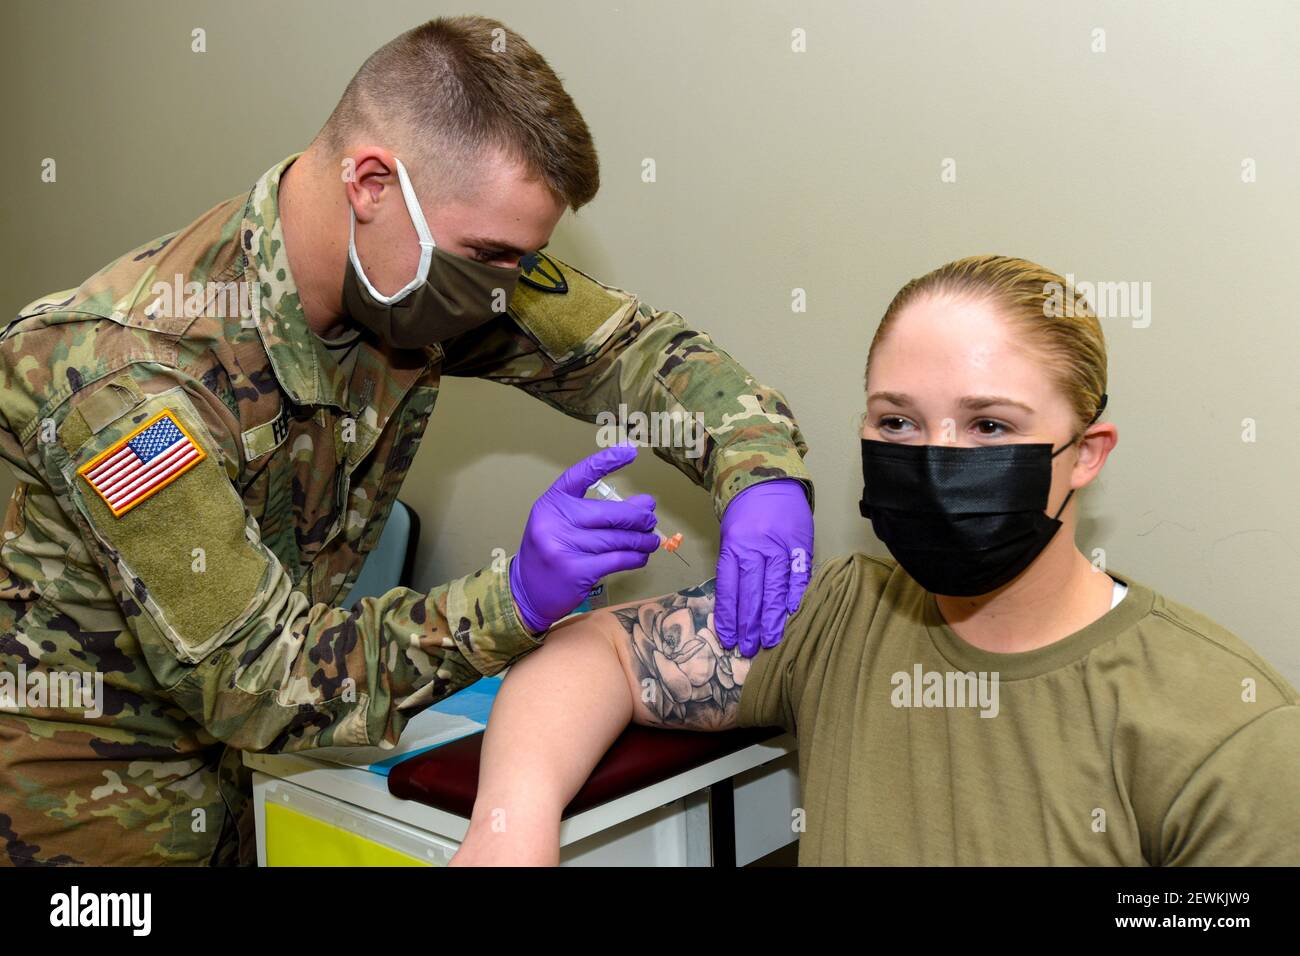 U. S. Army Spc. Virginia Monts, South Carolina National Guard 1-151st Attack Reconnaissance Battalion petroleum supply specialist, is injected with Stock Photo